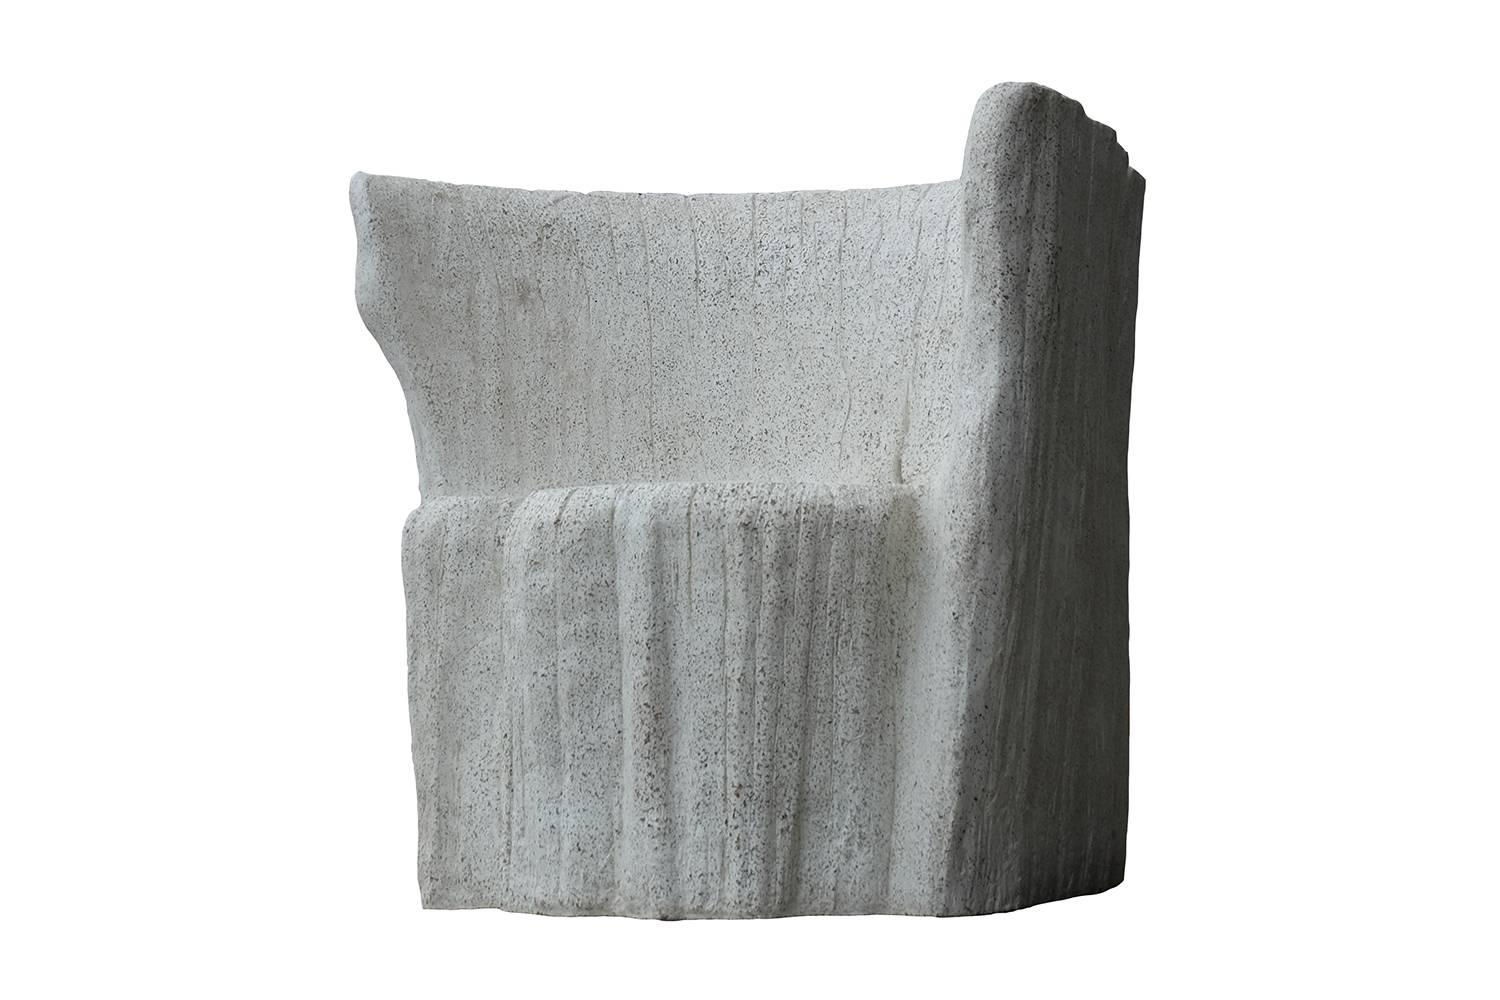 The mold for this Acacia chair was created from an actual tree stump. Pictured in our natural stone finish, the texture and modern look of concrete make it appropriate for a wide variety of styles and spaces.

Measures: The Acacia chair (ZBT108)